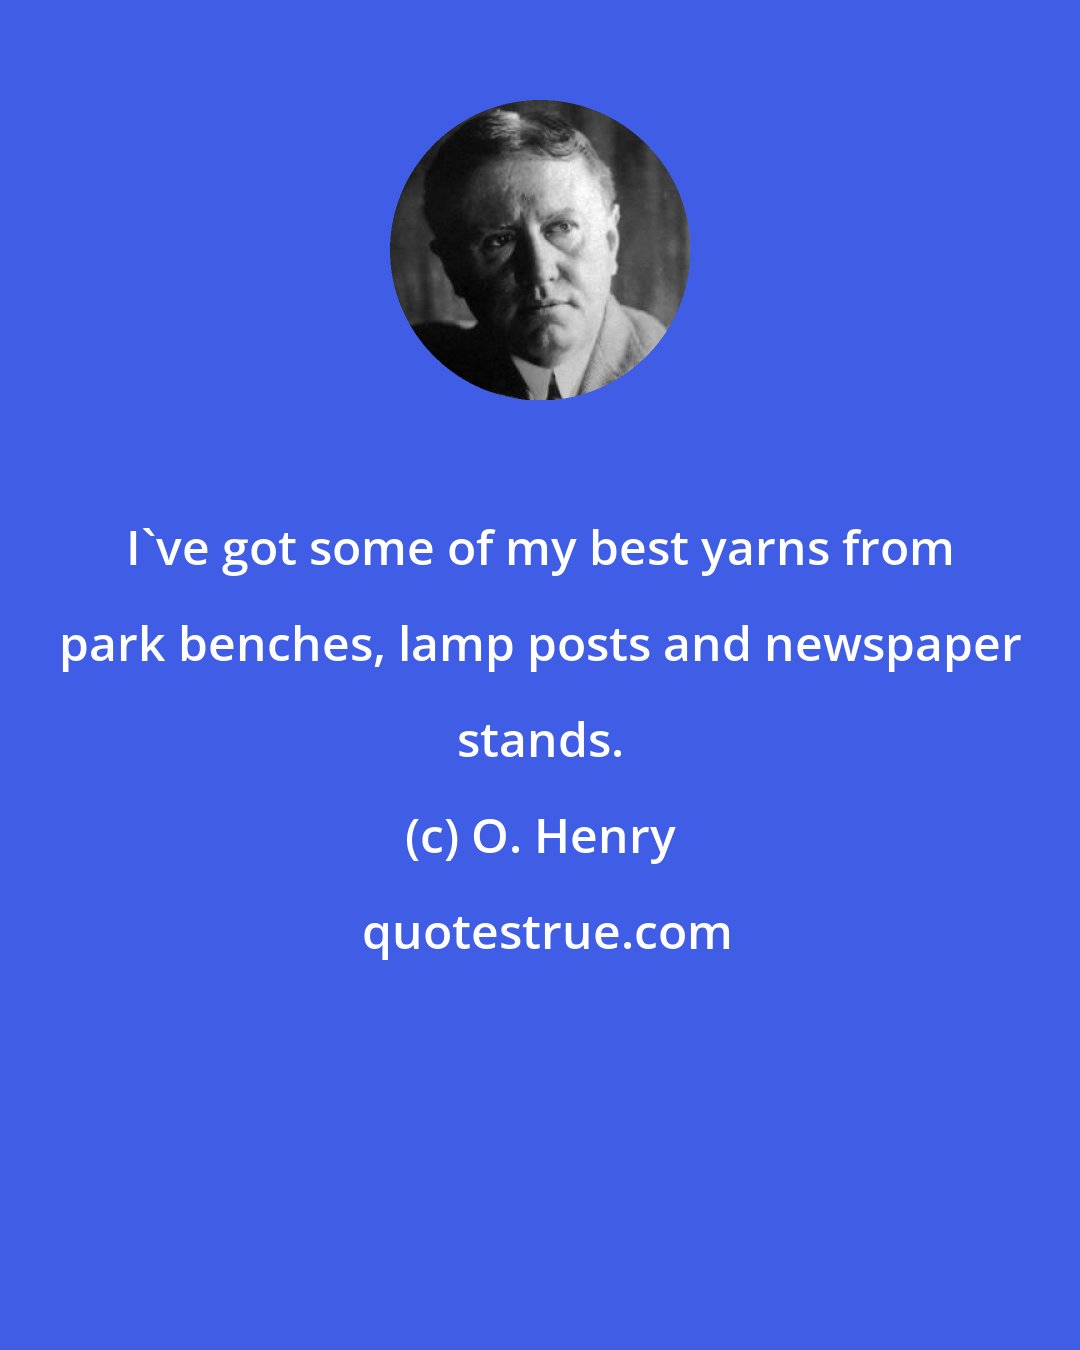 O. Henry: I've got some of my best yarns from park benches, lamp posts and newspaper stands.